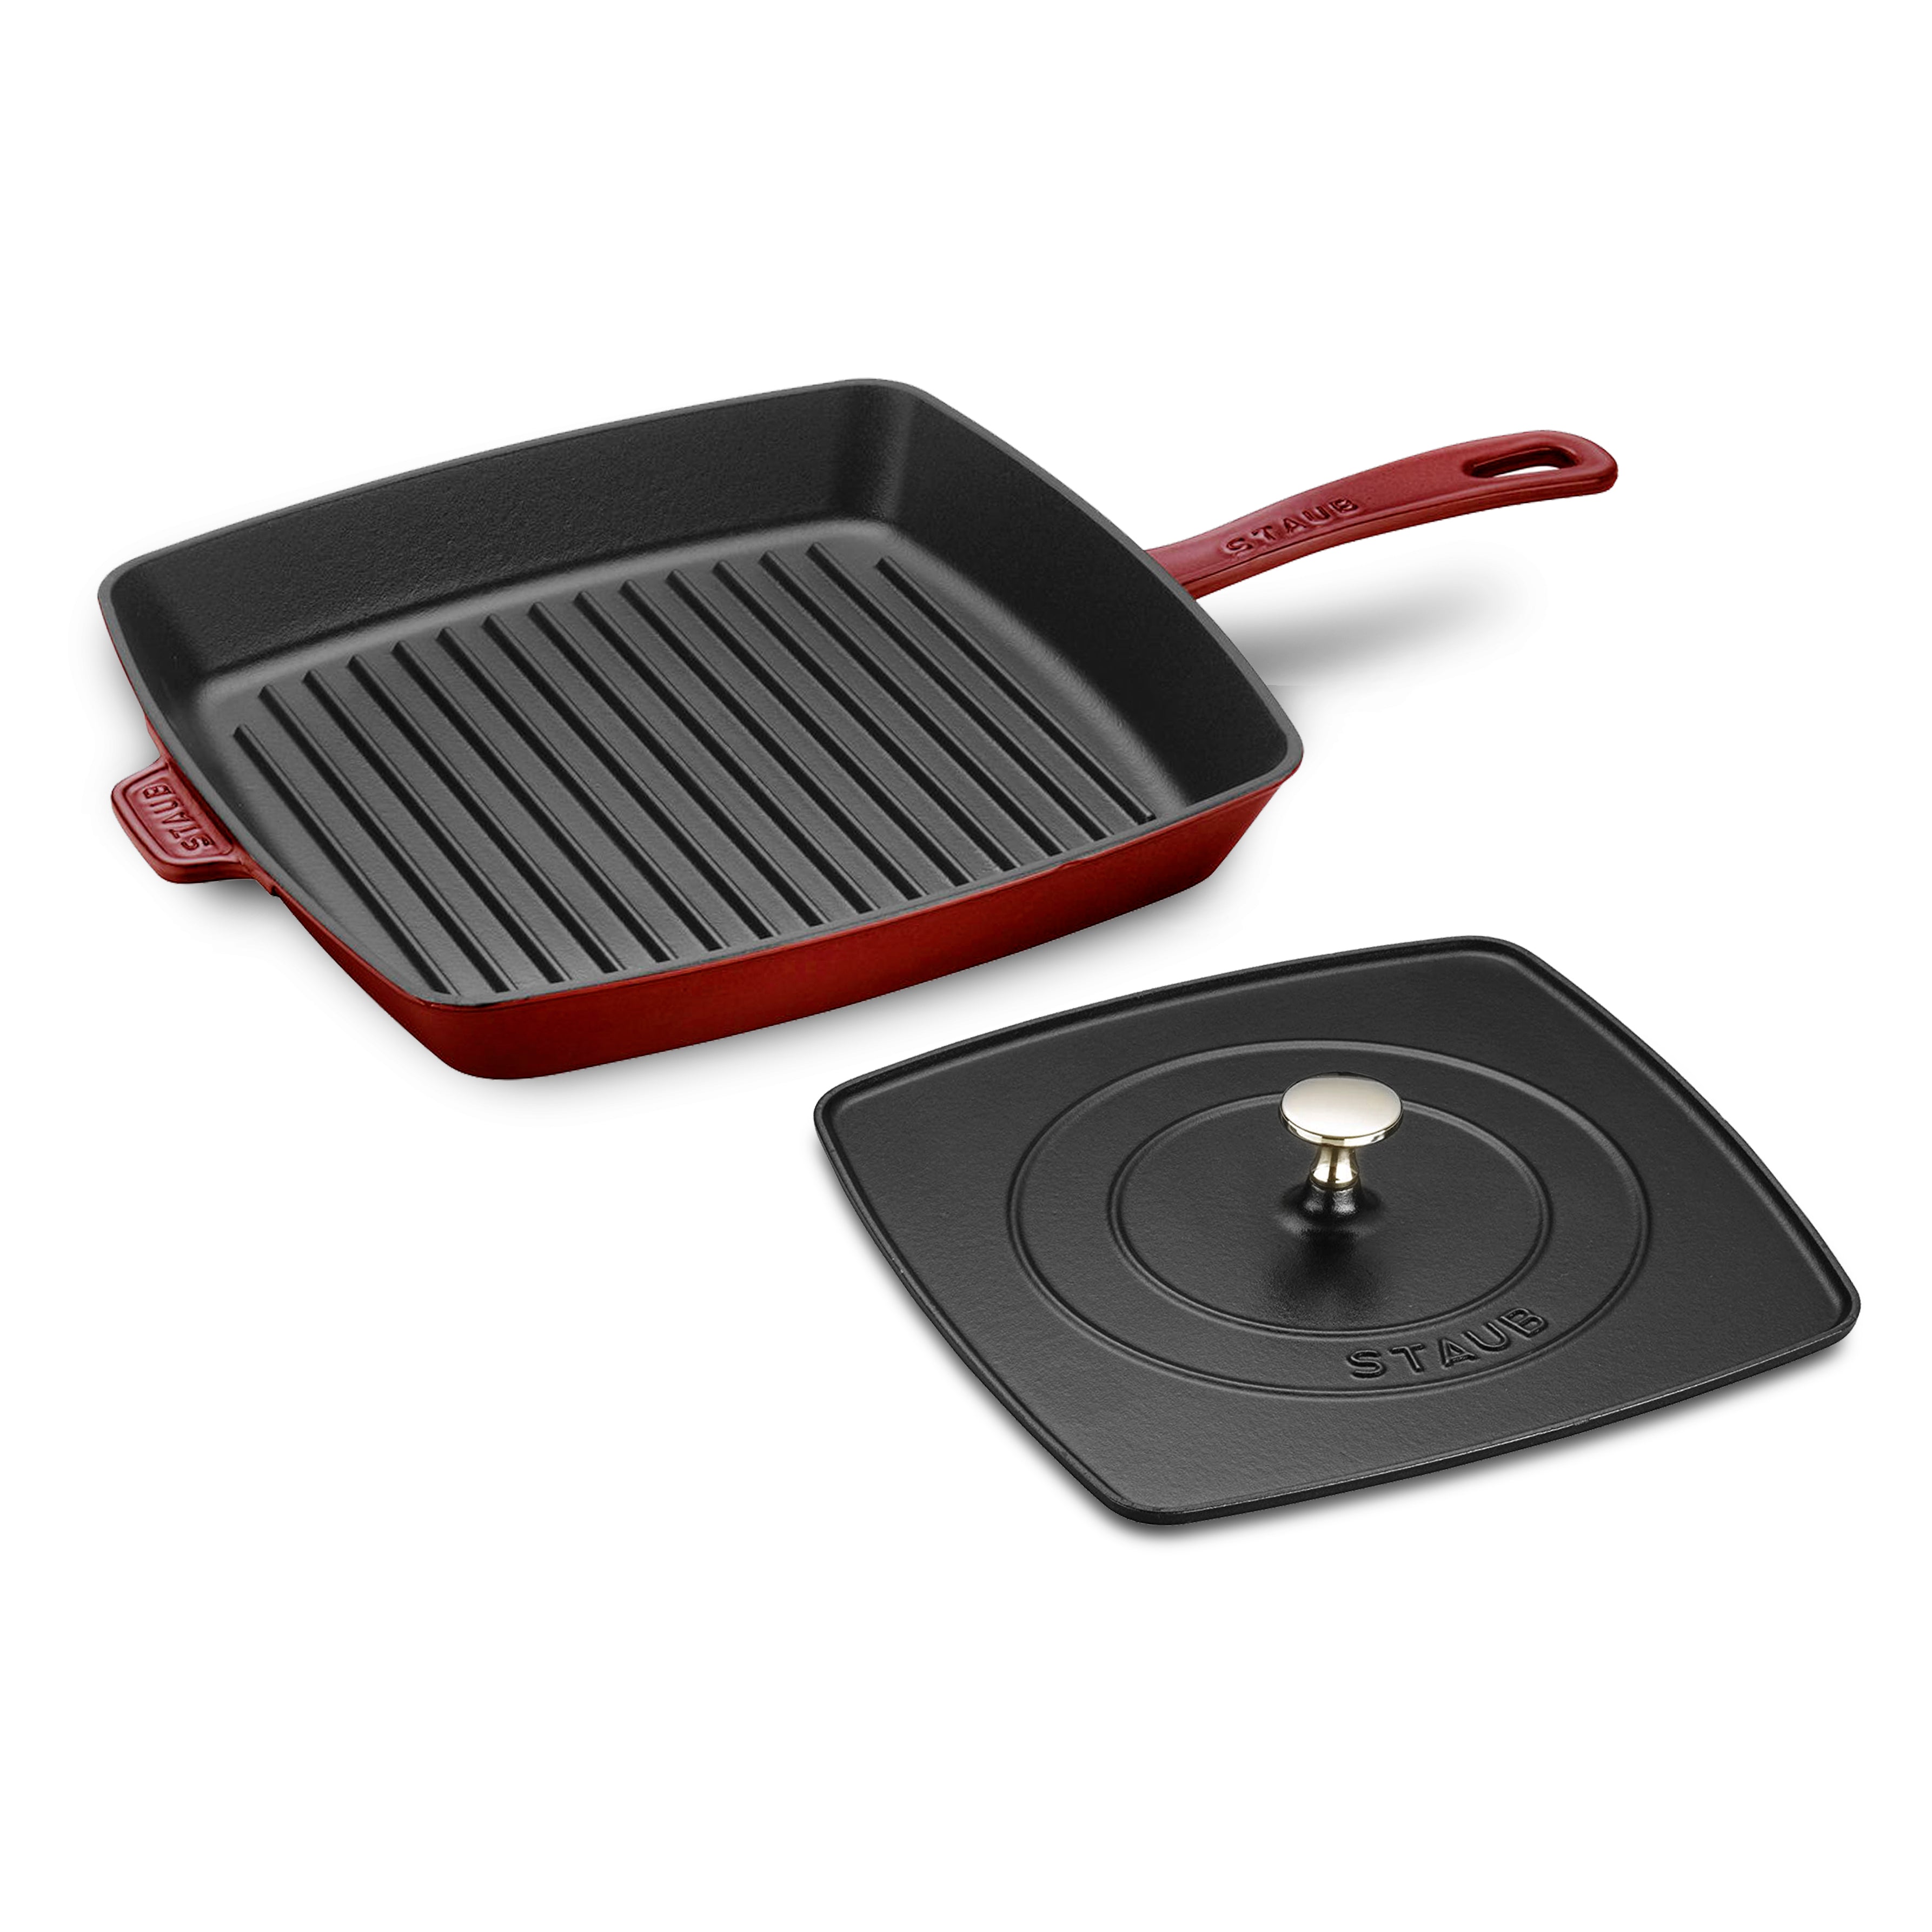 SHINESTAR Cast Iron Griddle Press with 12-Inch Melting Dome for